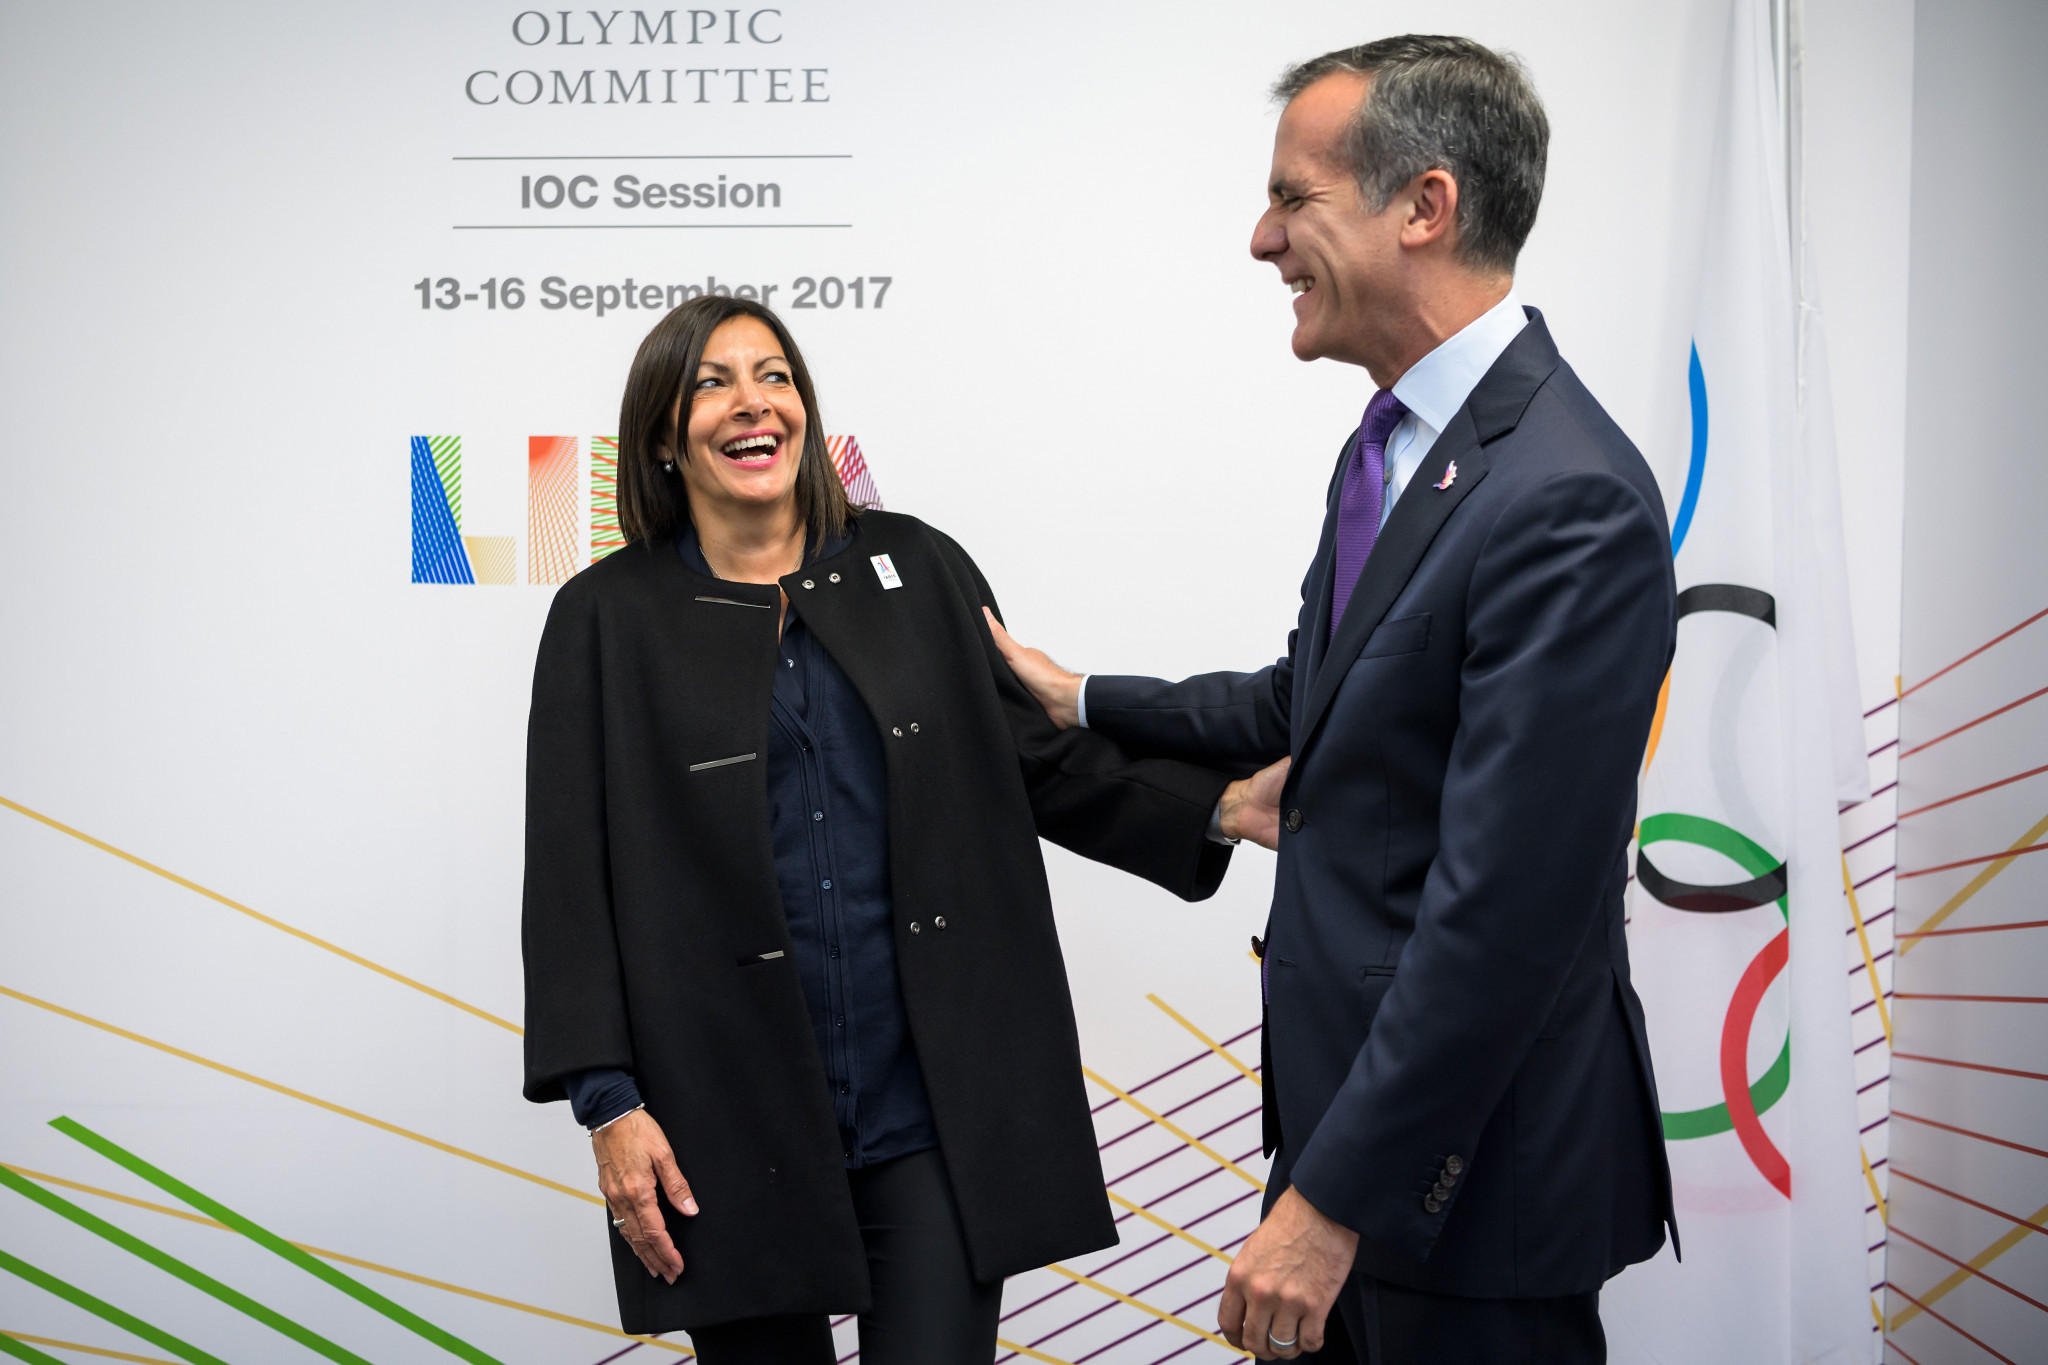 Paris 2024 and Los Angeles 2028 to sign Olympic twinning agreement at Mayors summit